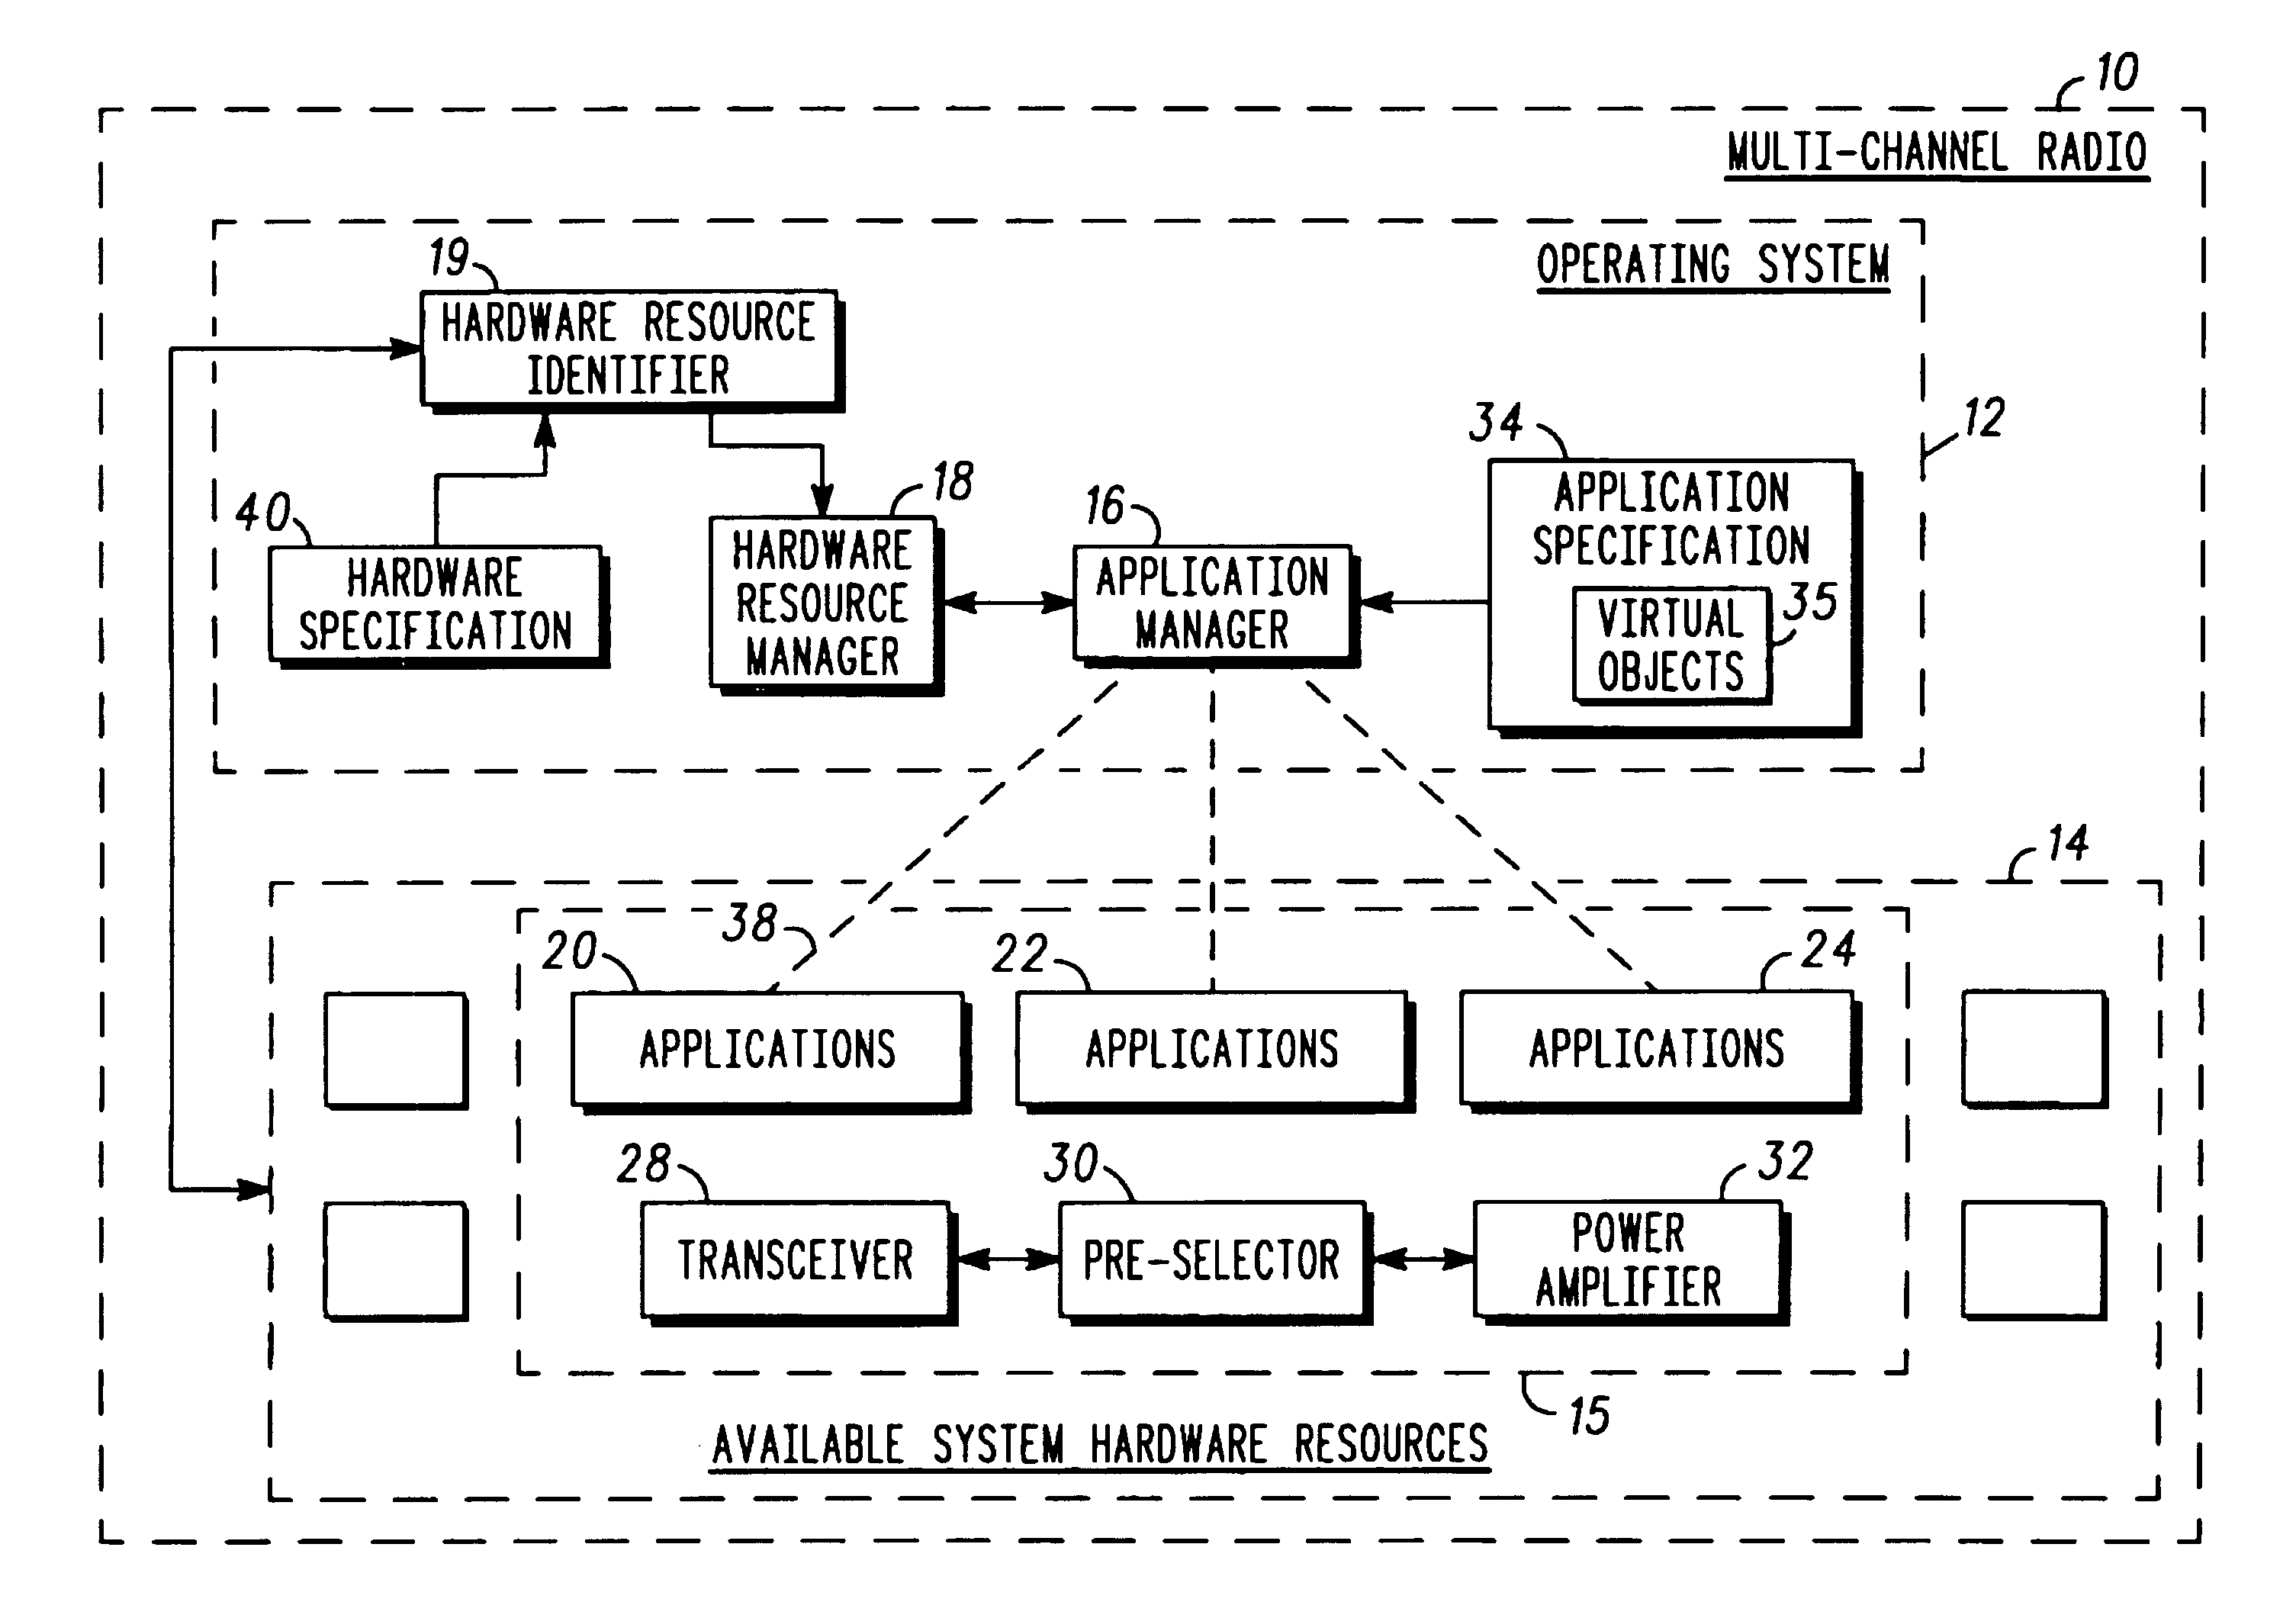 Hardware resource identifier for software-defined communications system